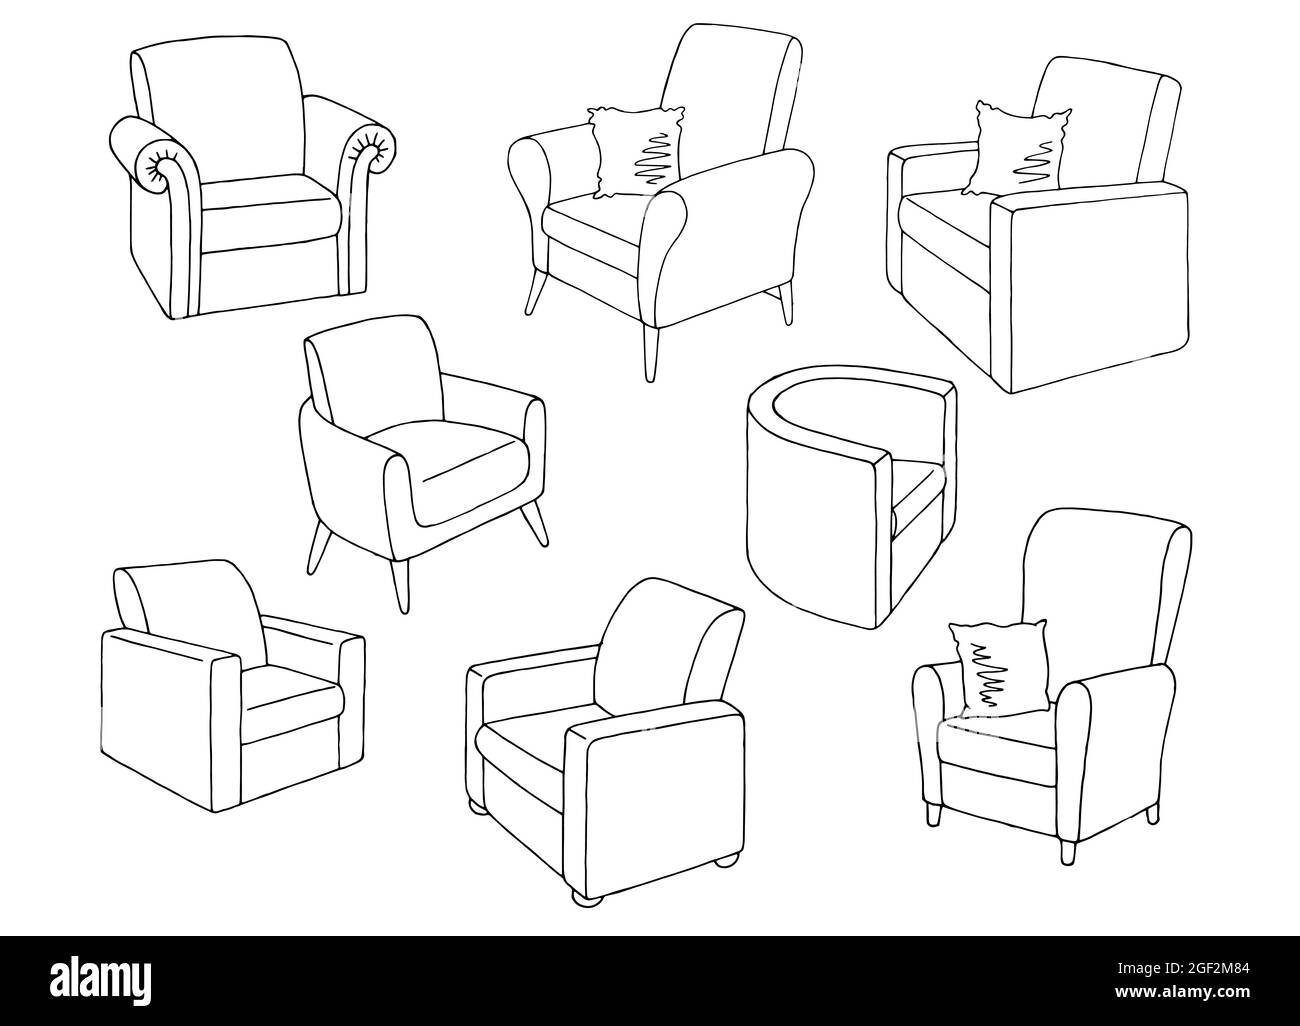 Armchair set graphic black white isolated sketch illustration vector Stock Vector